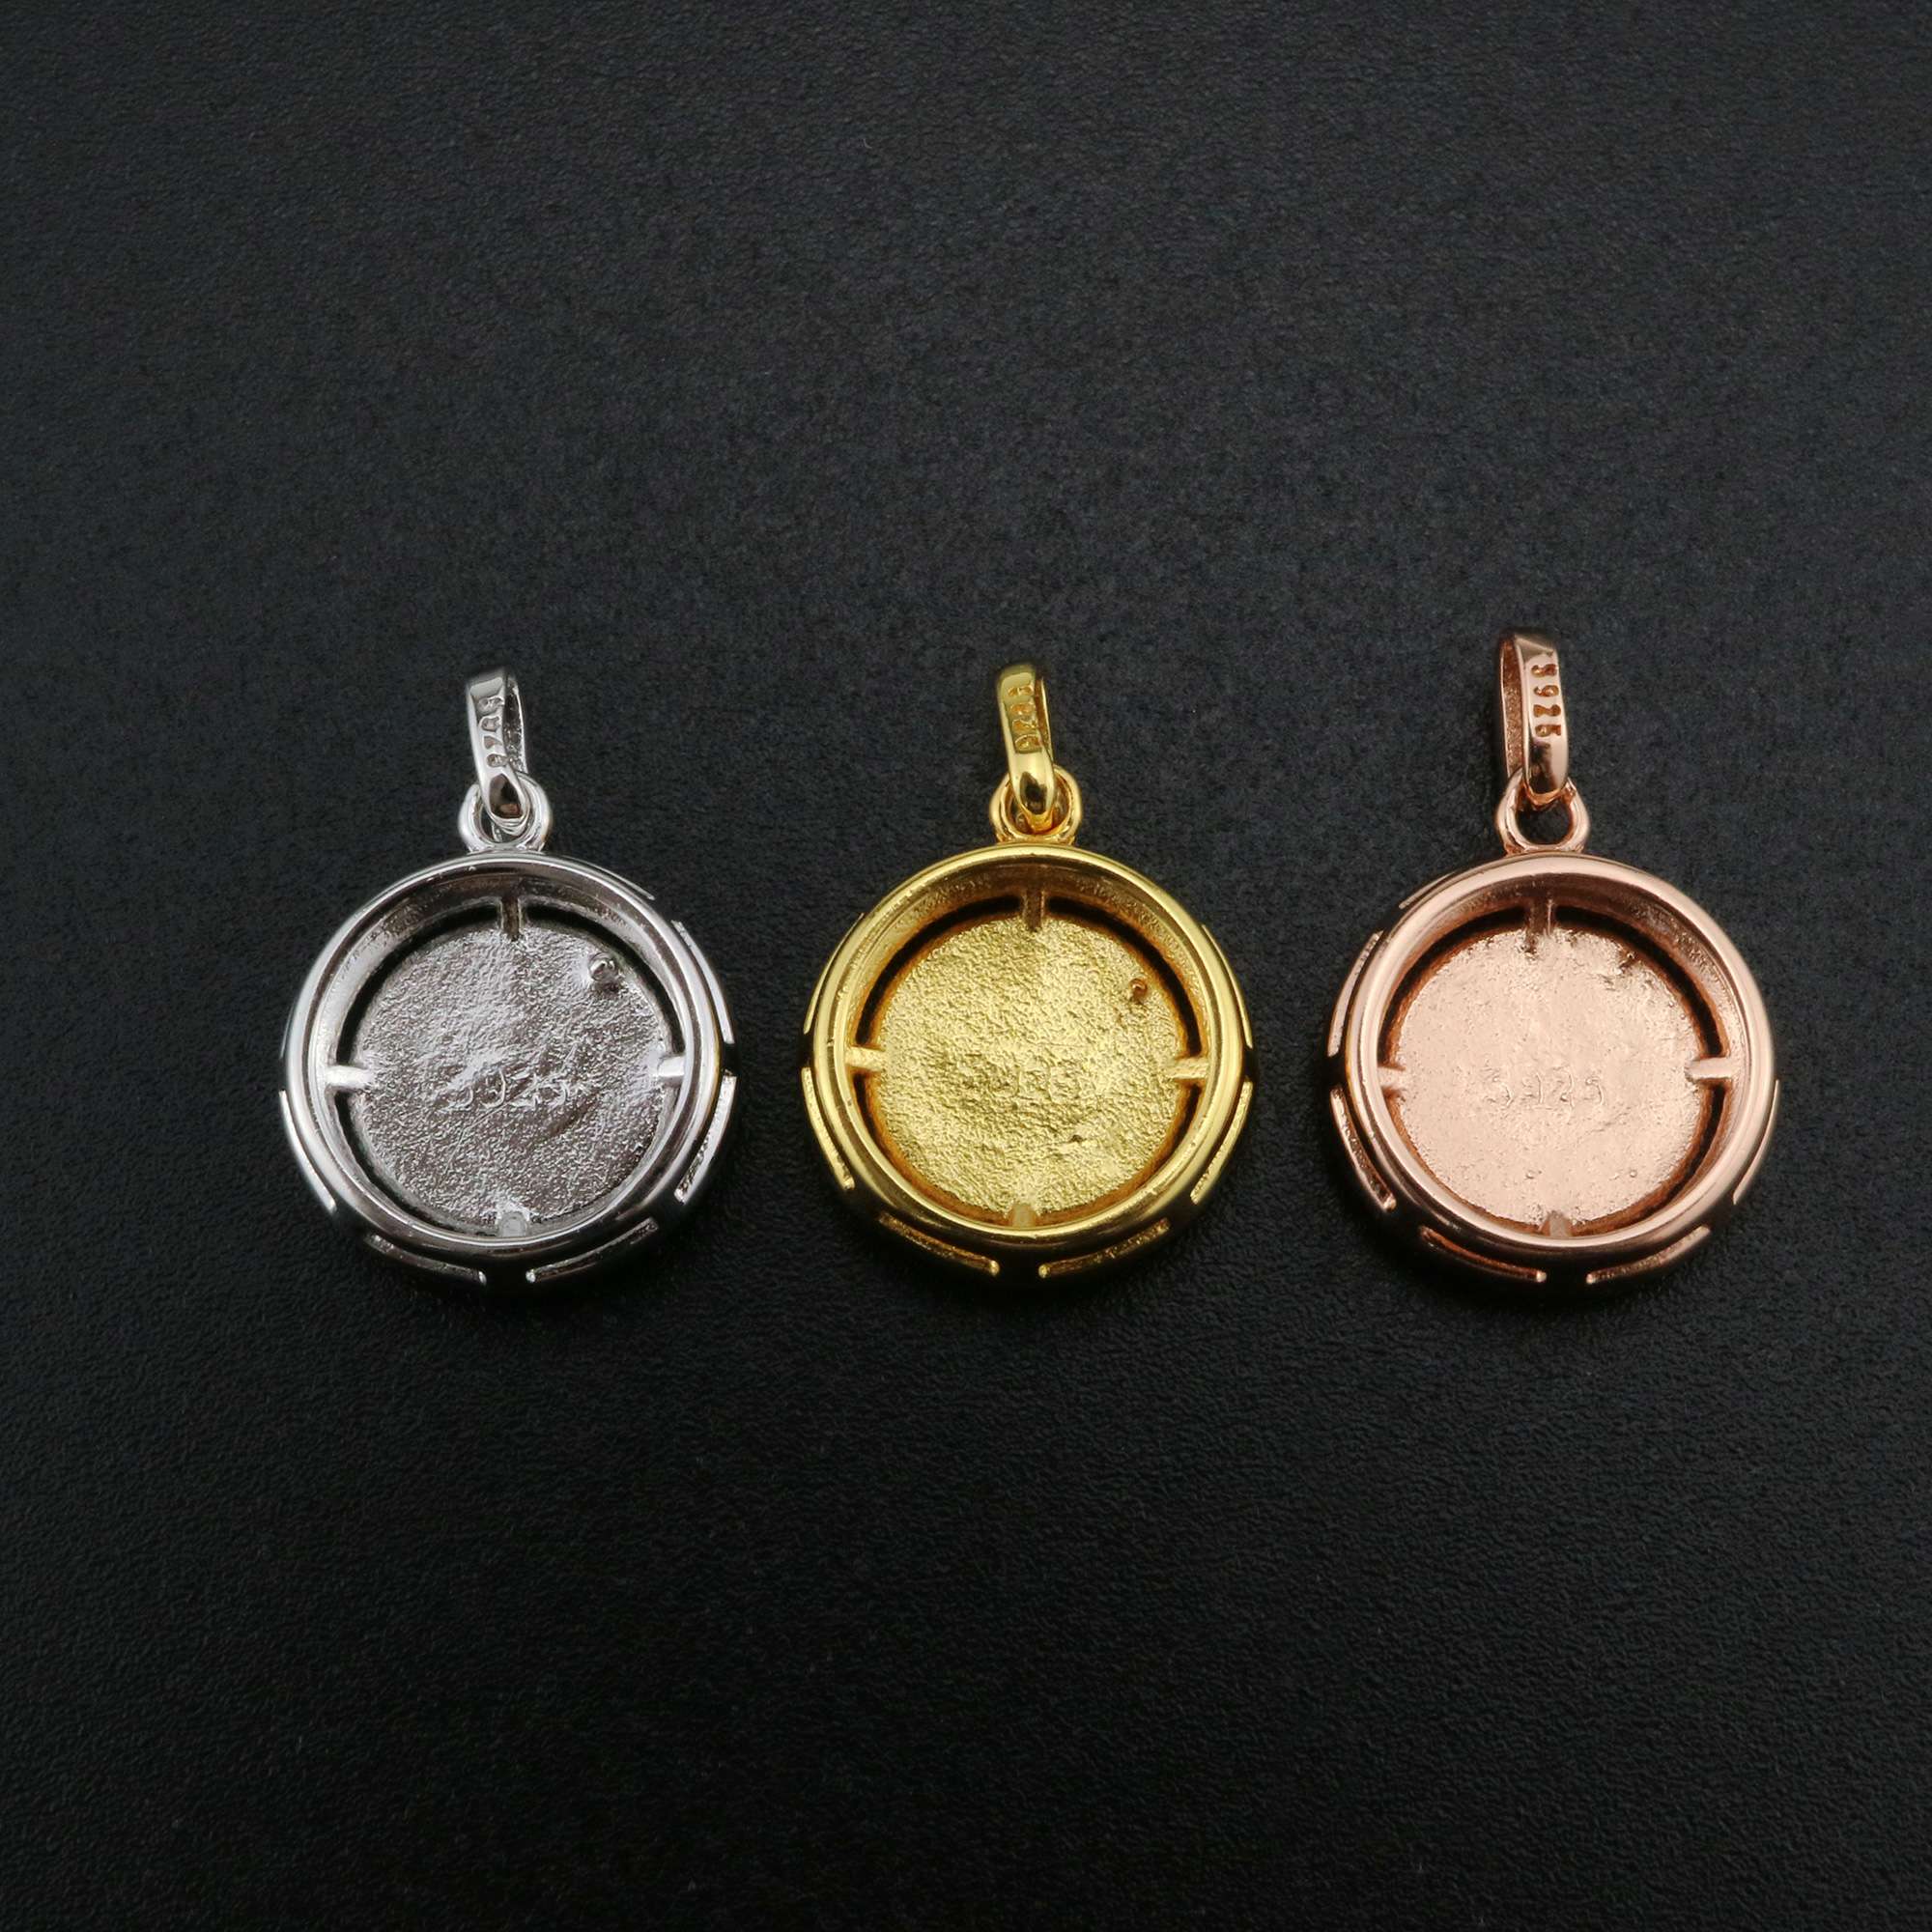 Keepsake Breast Milk Resin Round Pendant Bezel 8MM Solid Back Cabochon Settings 925 Sterling Silver Rose Gold Plated Halo Charm DIY Supplies 1411273 - Click Image to Close